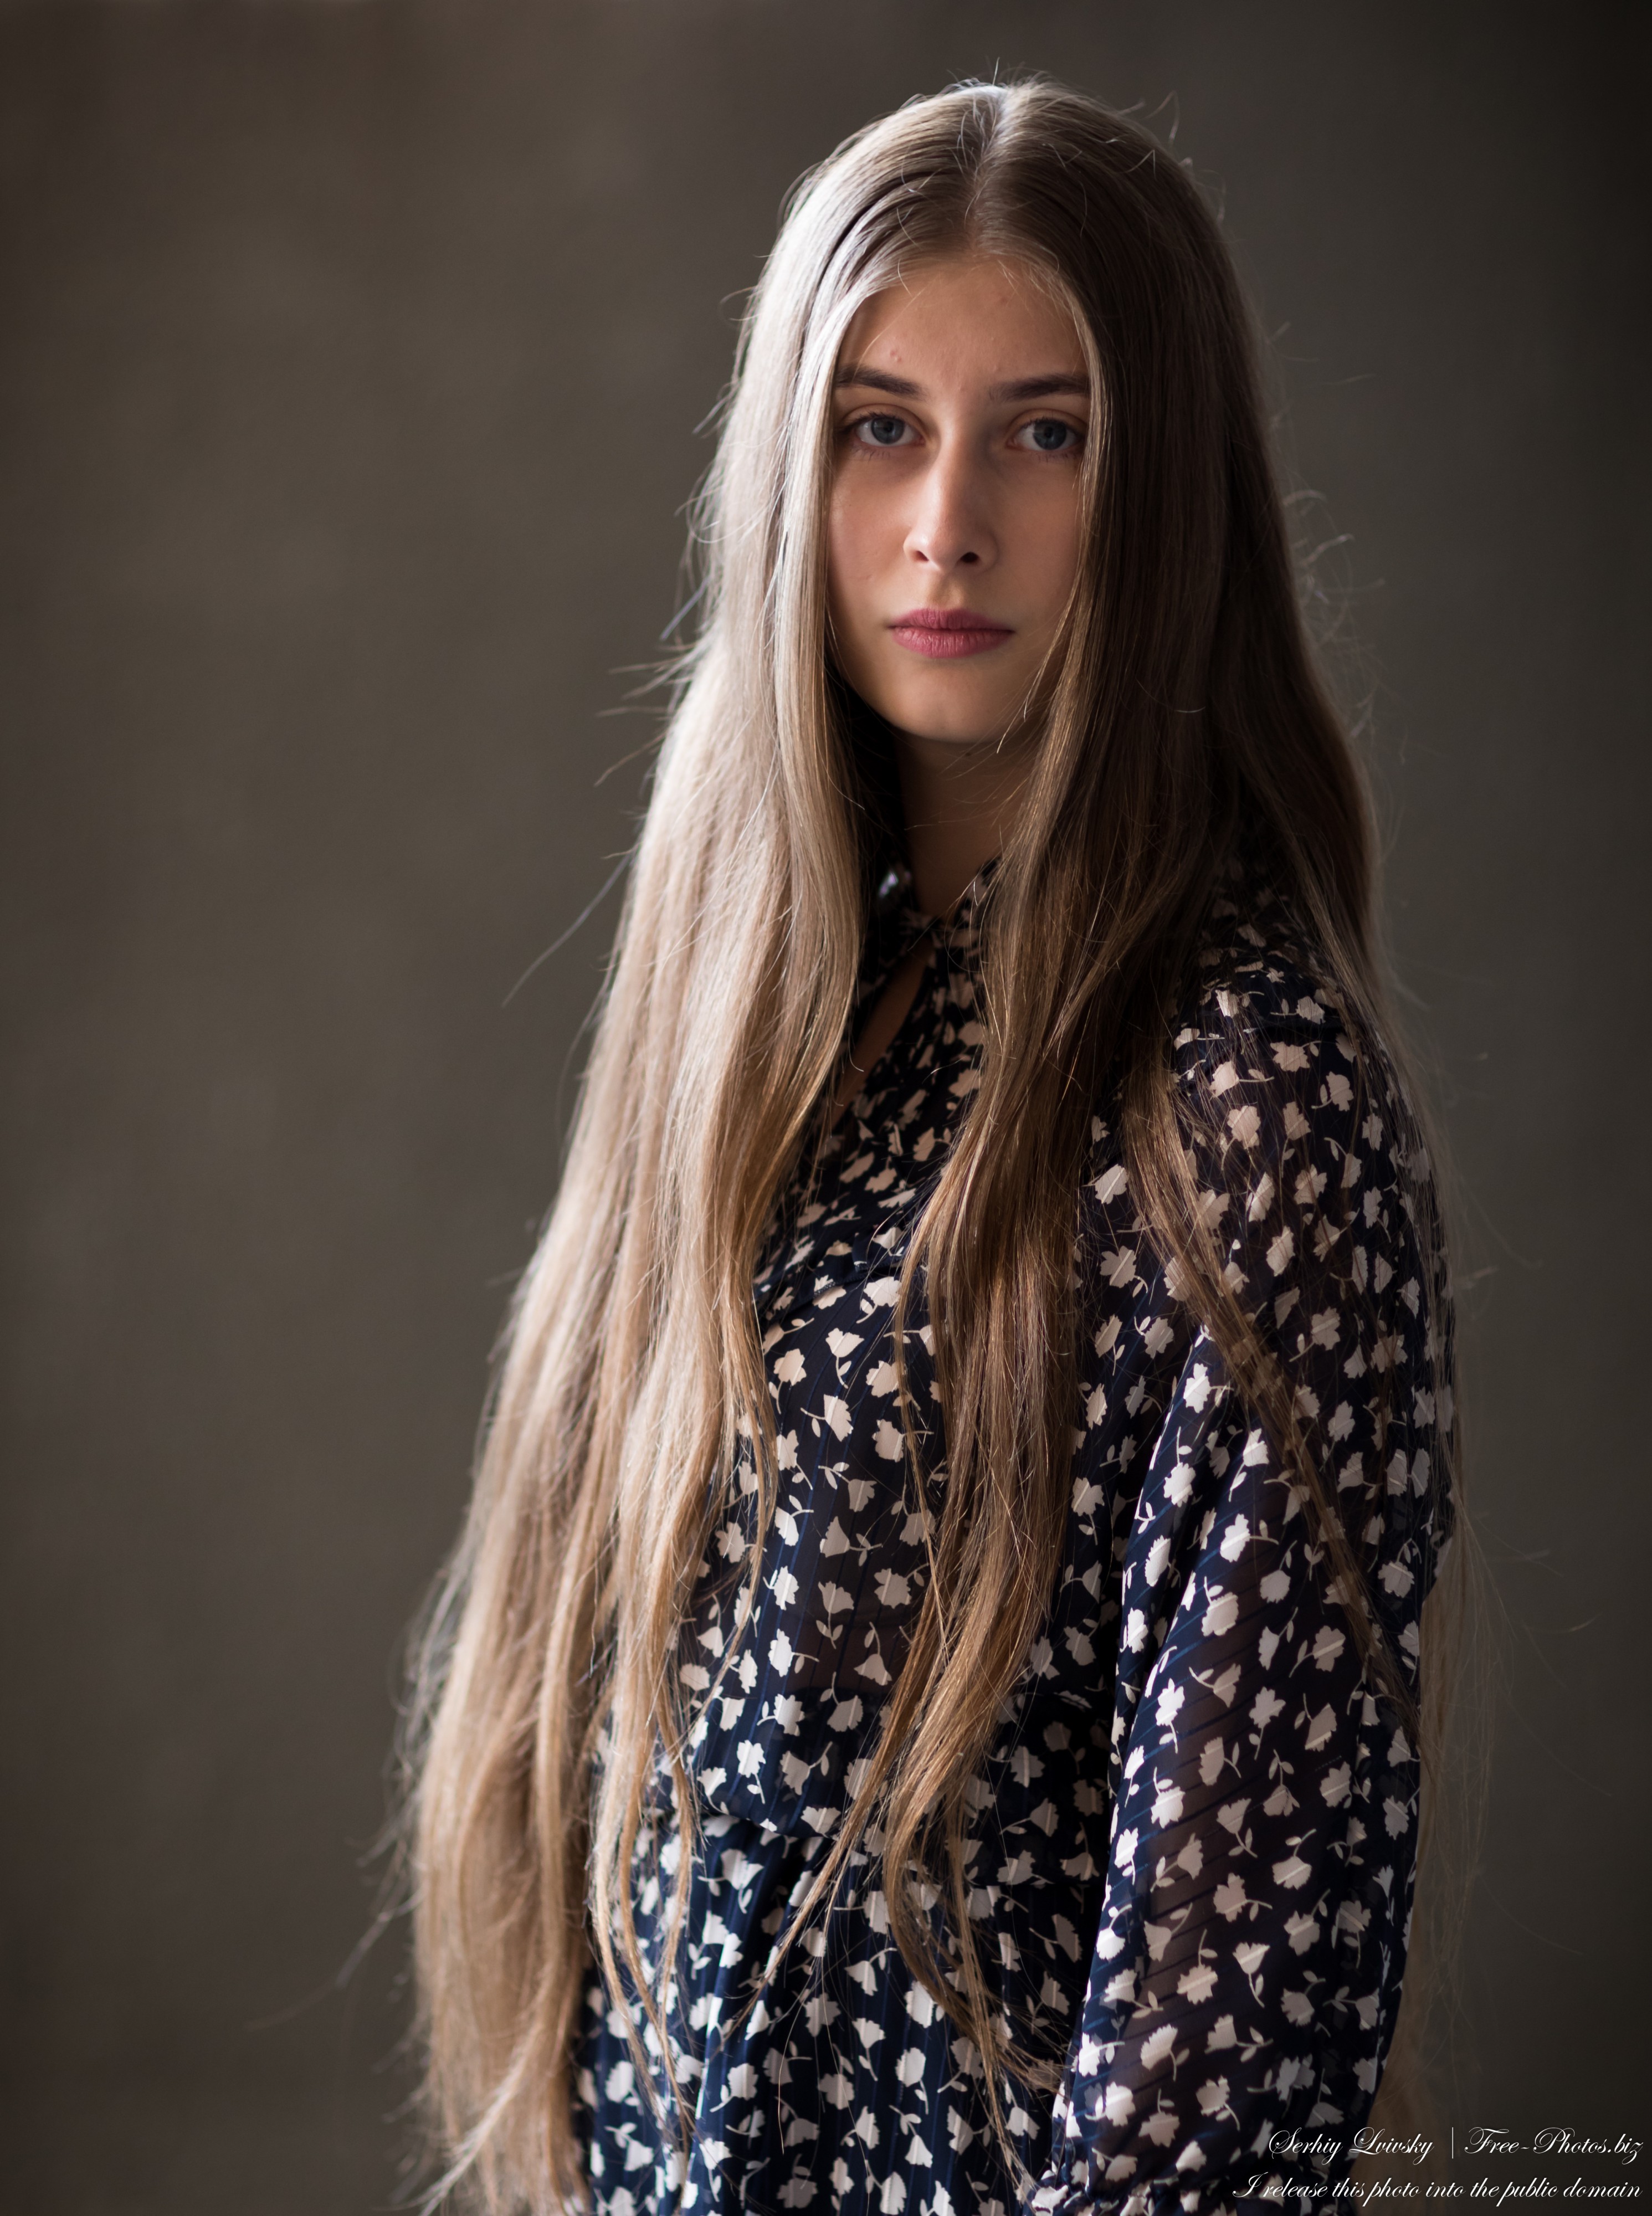 Diana - a 20-year-old girl photographed in July 2020 by Serhiy Lvivsky, picture 4